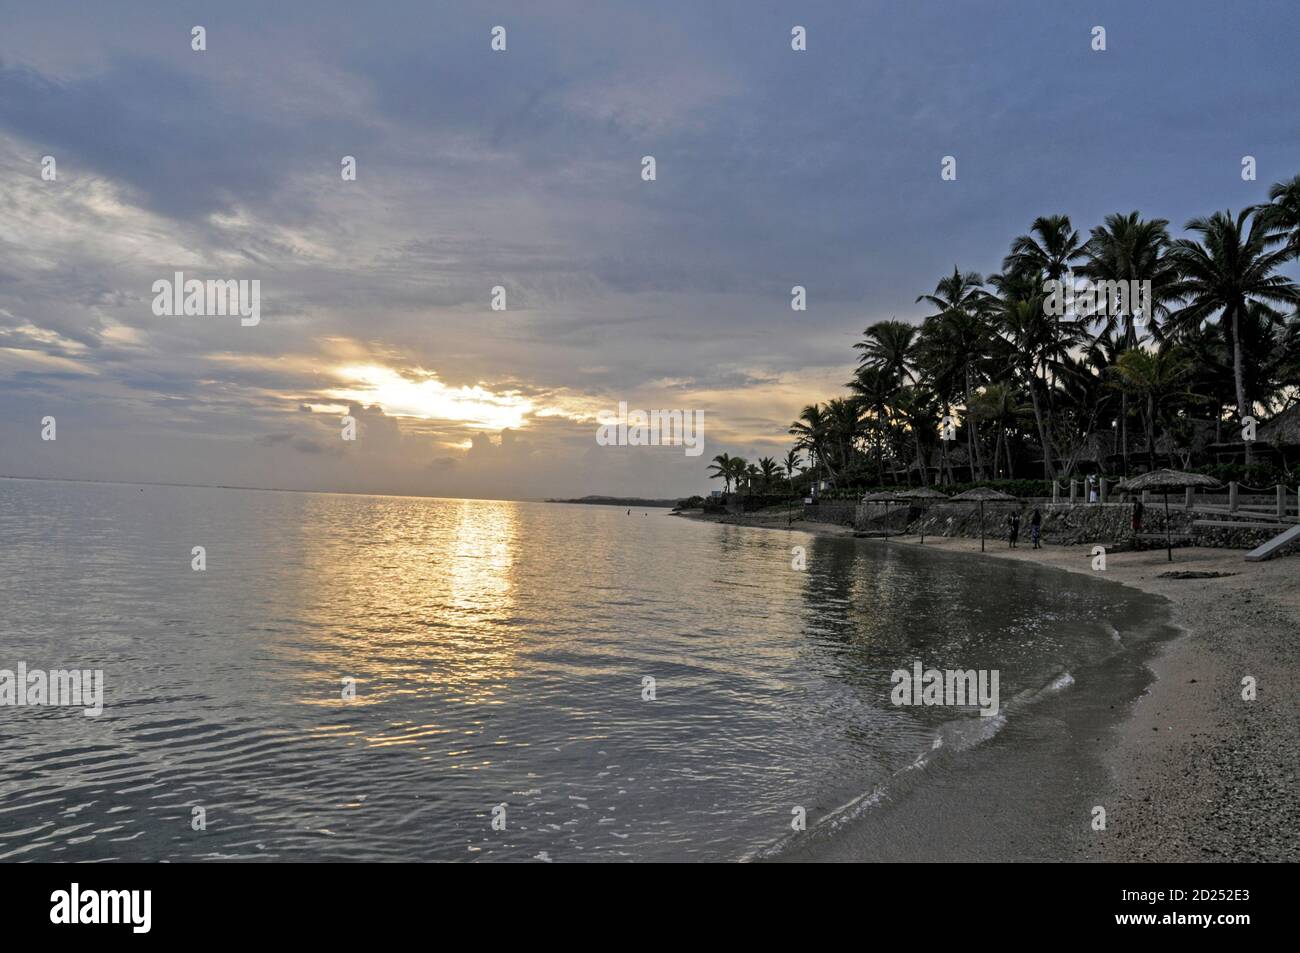 At dusk over a beach on the south coast of Viti Levu, the largest island in Fiji in the South Pacific. Stock Photo